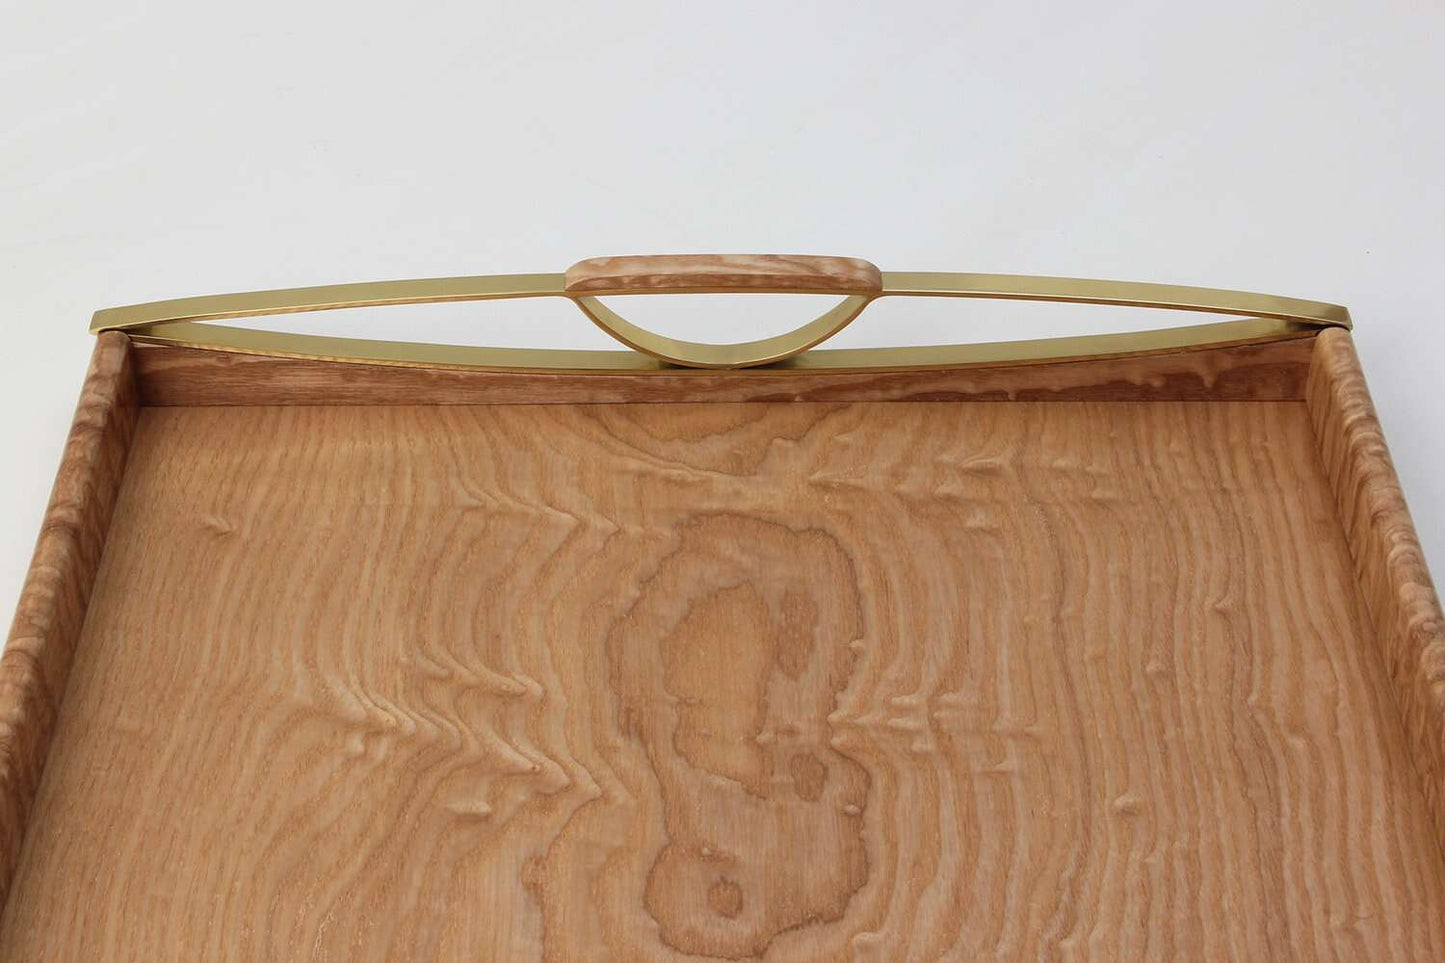 Wooden serving tray gorgeous wooden serving tray